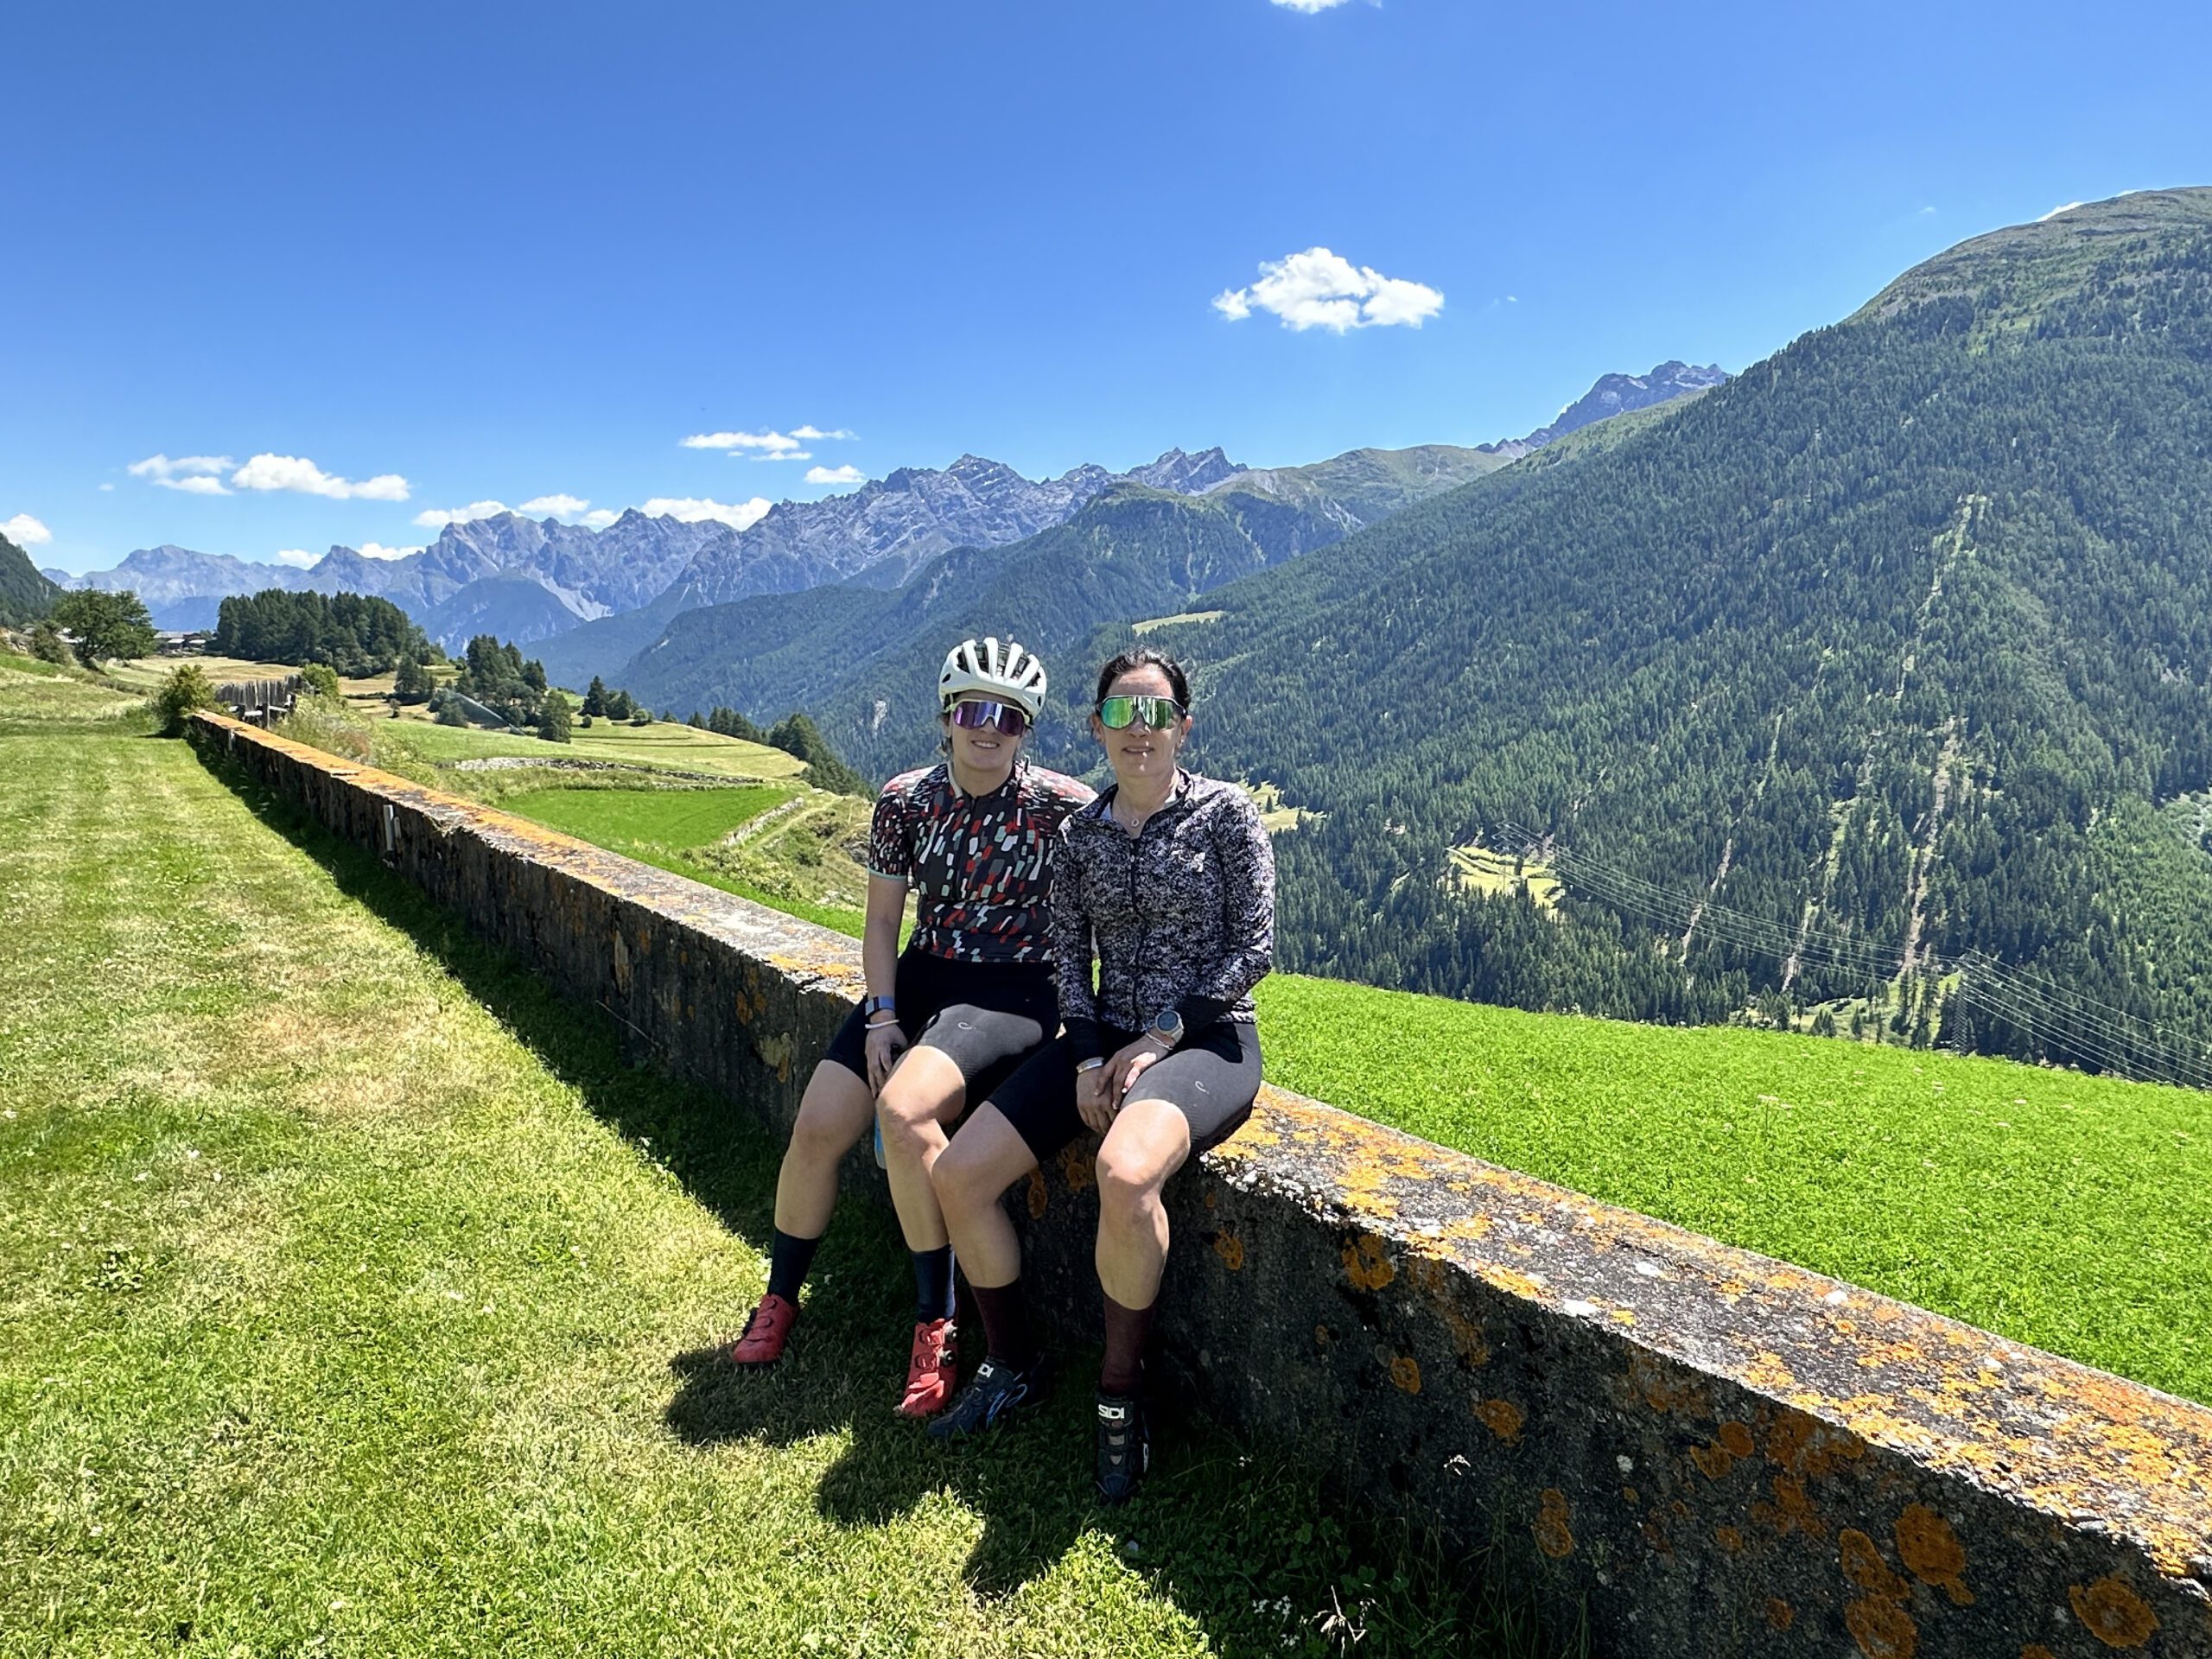 Two cyclists sit on a low stone wall with the Alps in the background